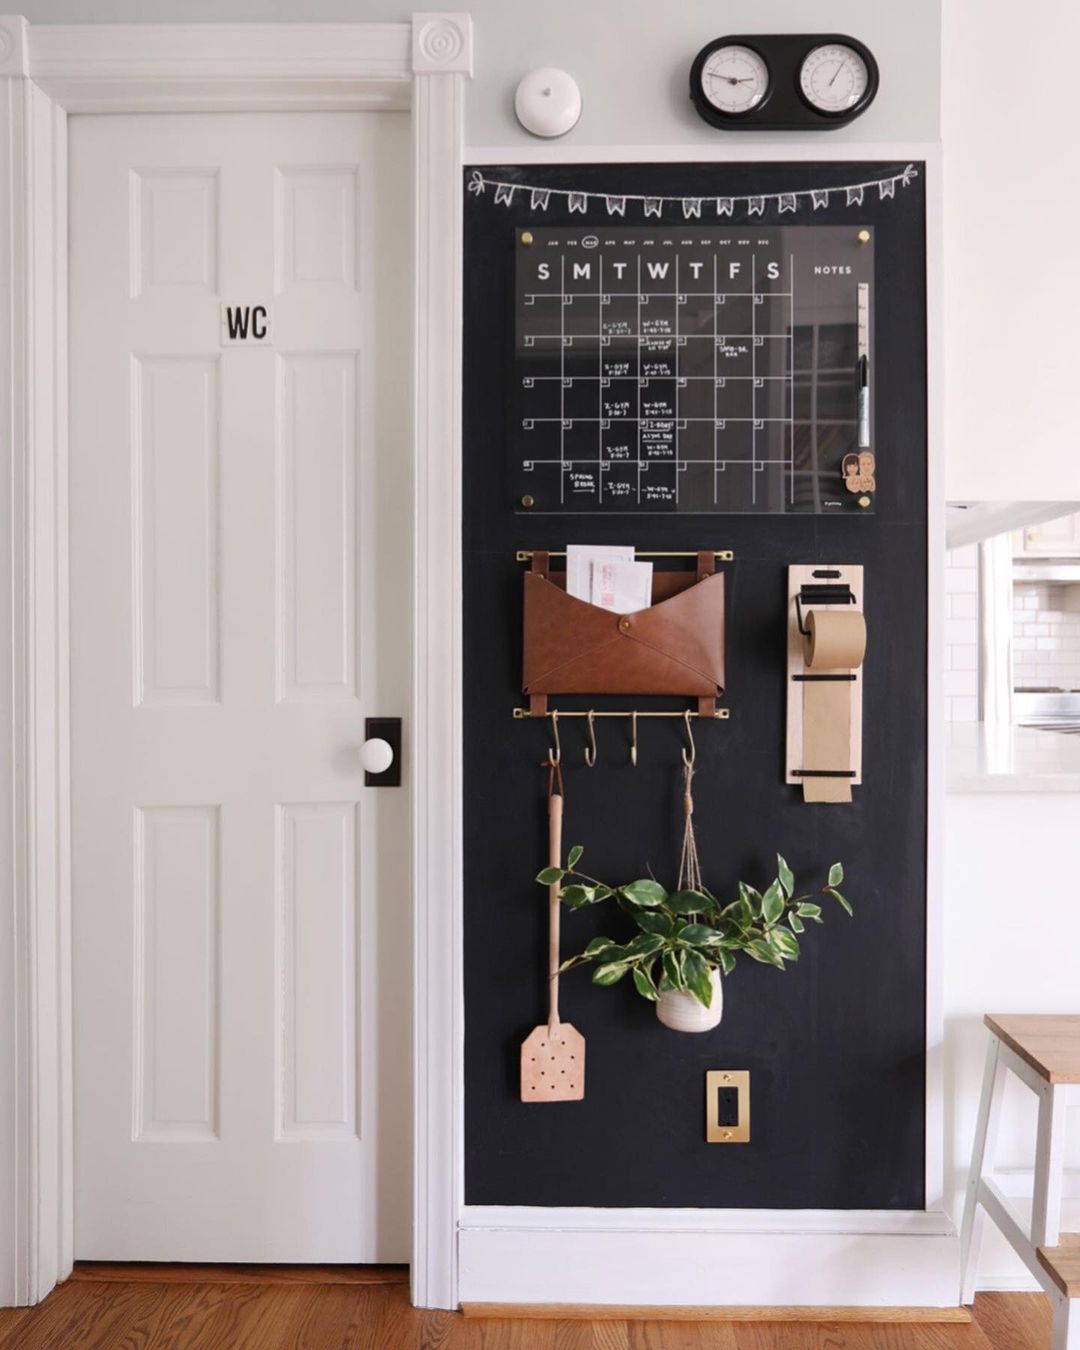 Black chalkboard accent wall next to kitchen entry with hanging acrylic calendar, cooking utensils, plant, leather pouch for envelopes and mail, and roll of brown paper for notes | Photo by Instragram user @sunnycirclestudio